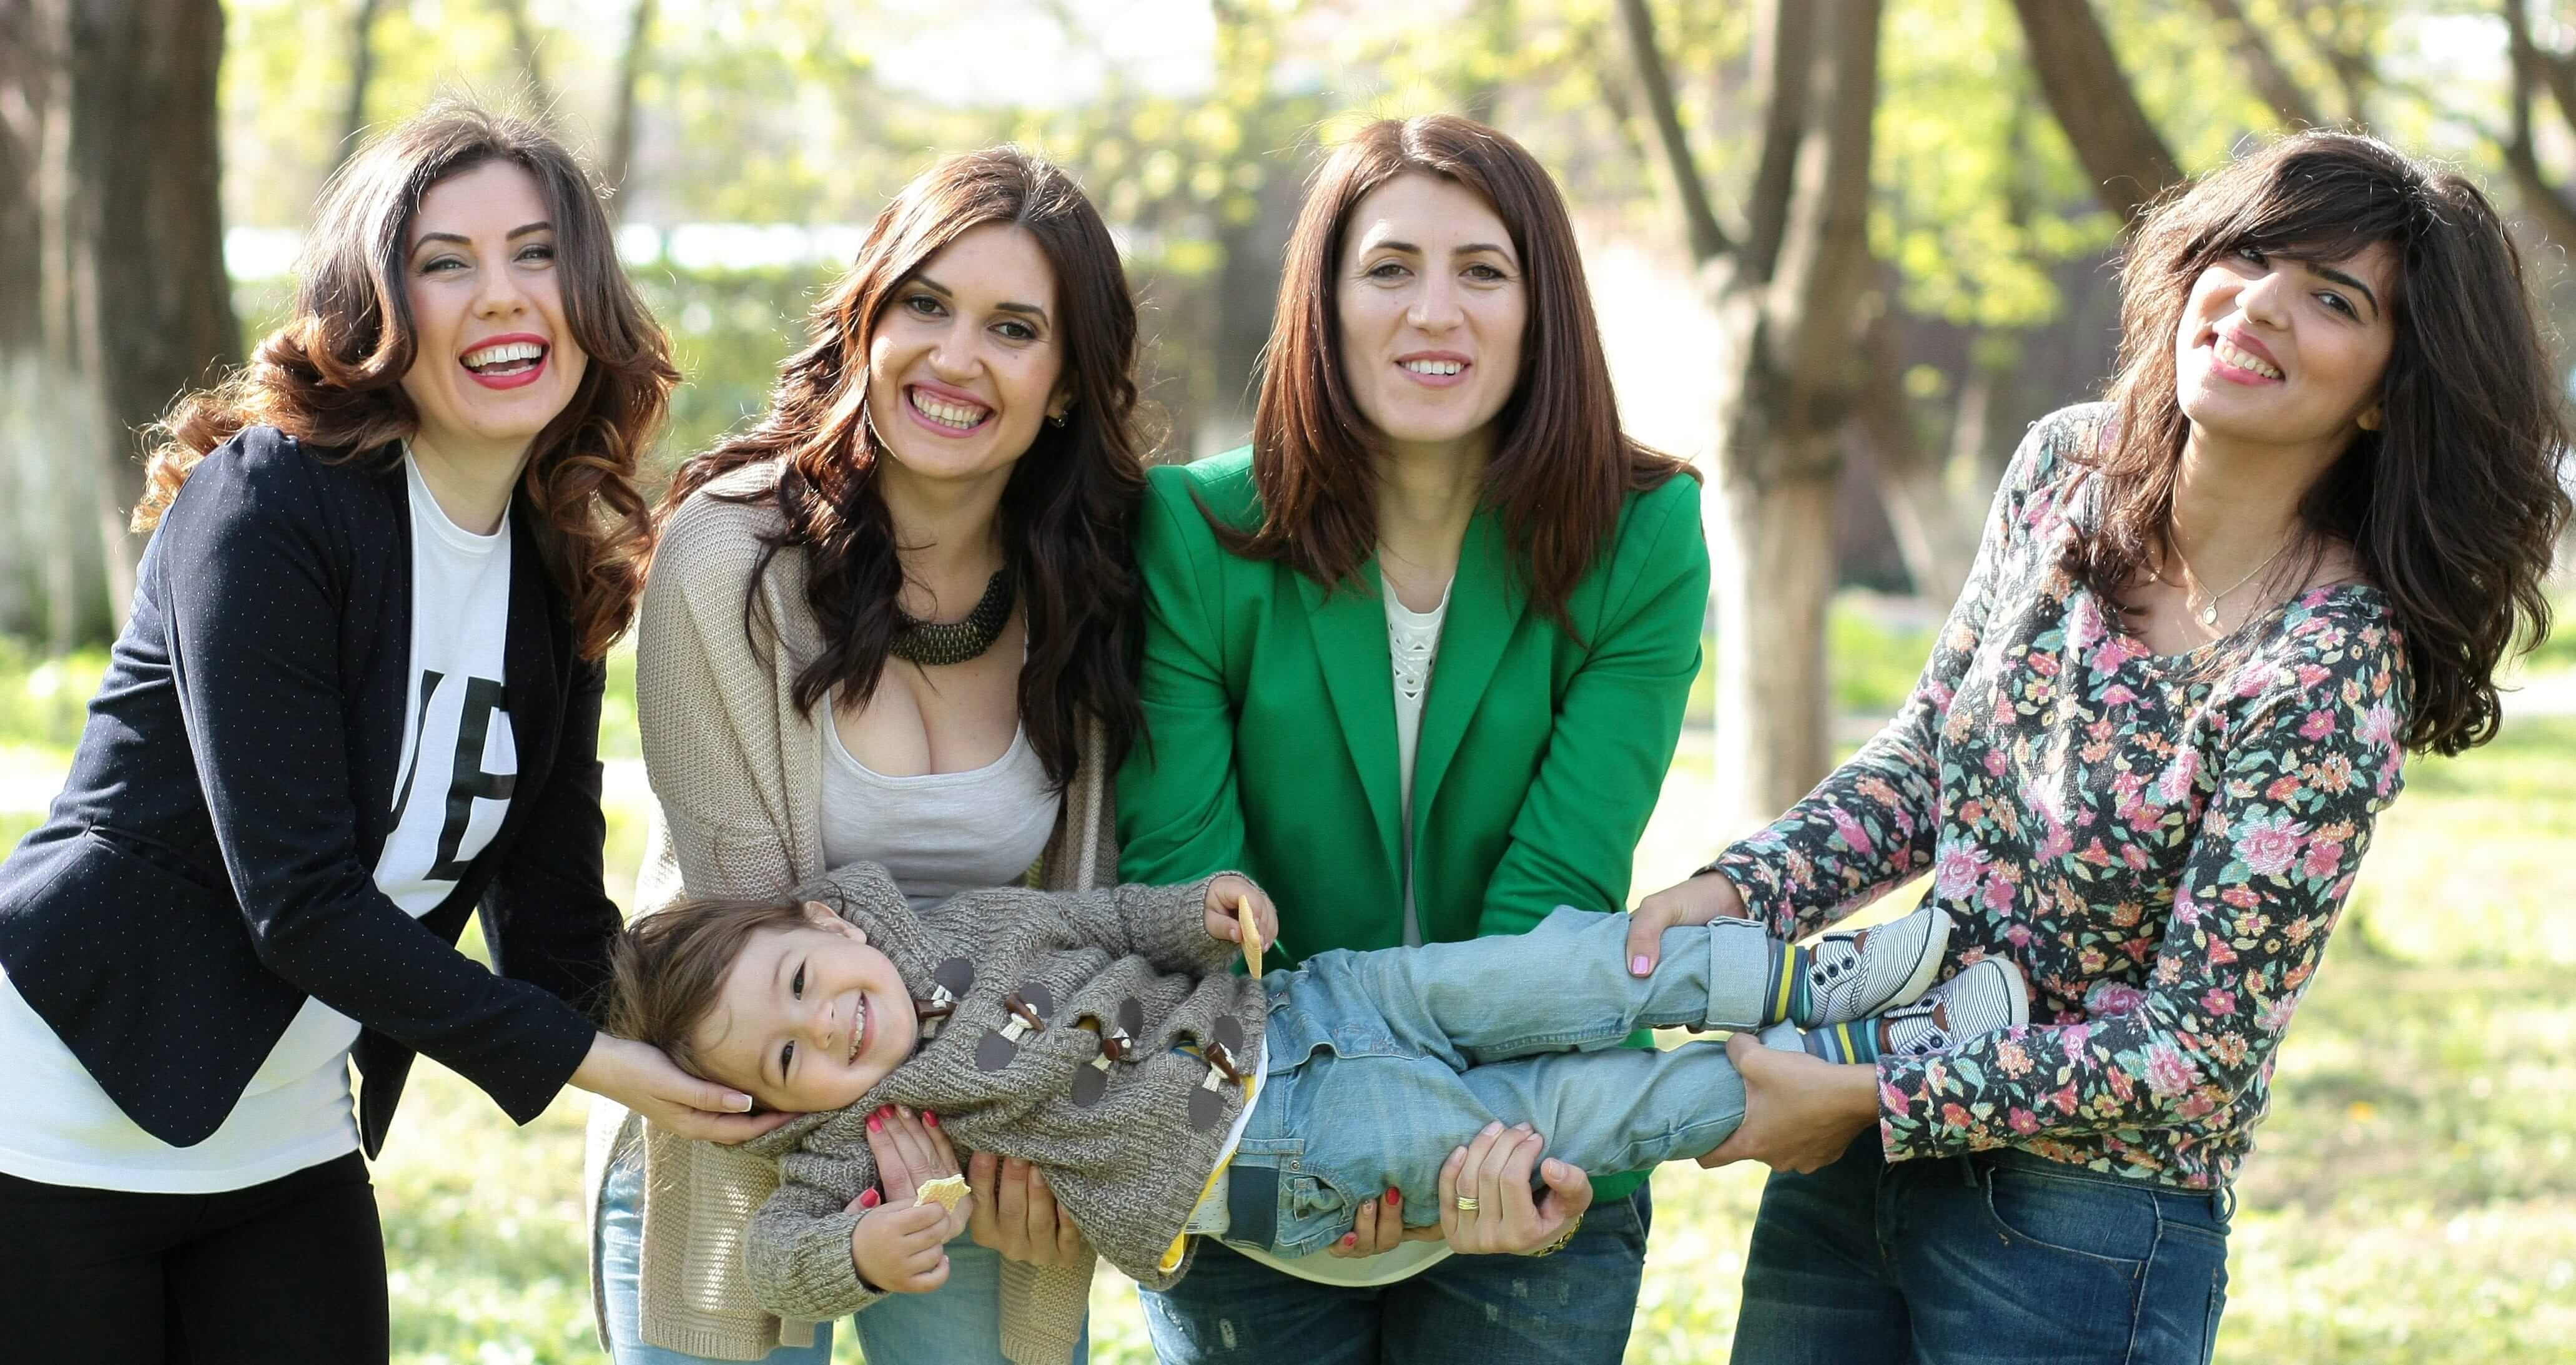 Four women holding a smiling child